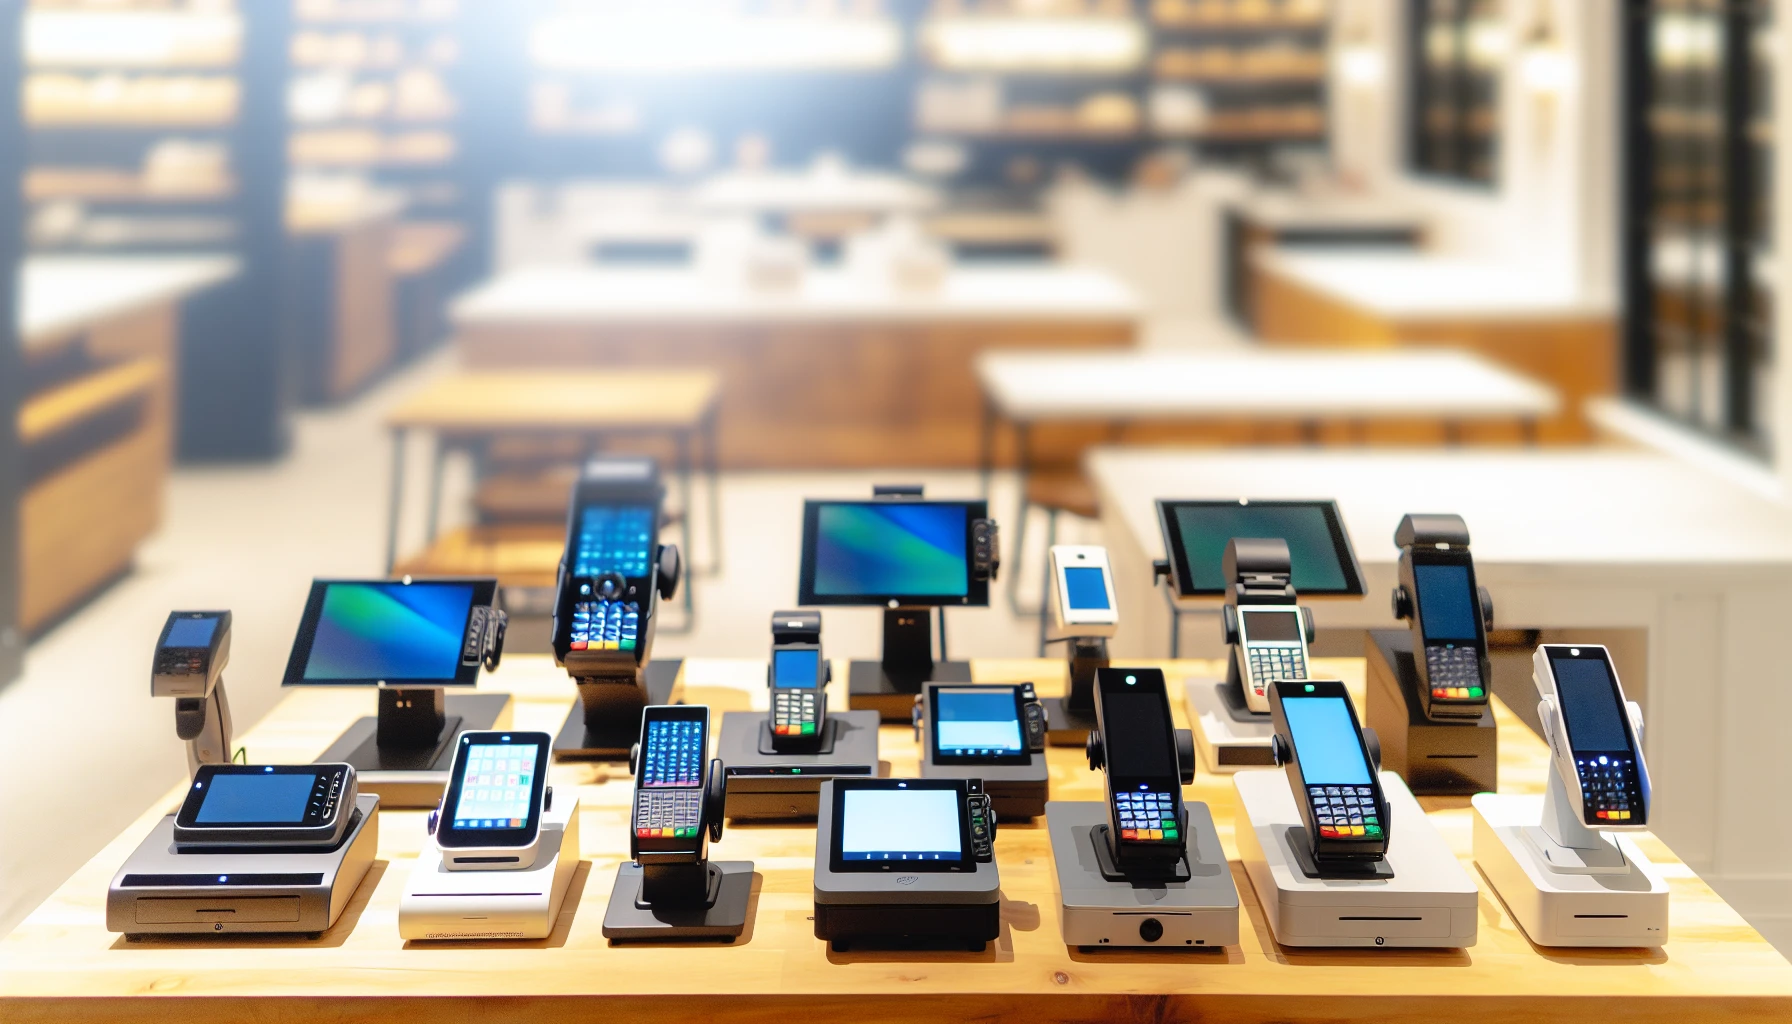 Choosing the Right POS System for Your Restaurant